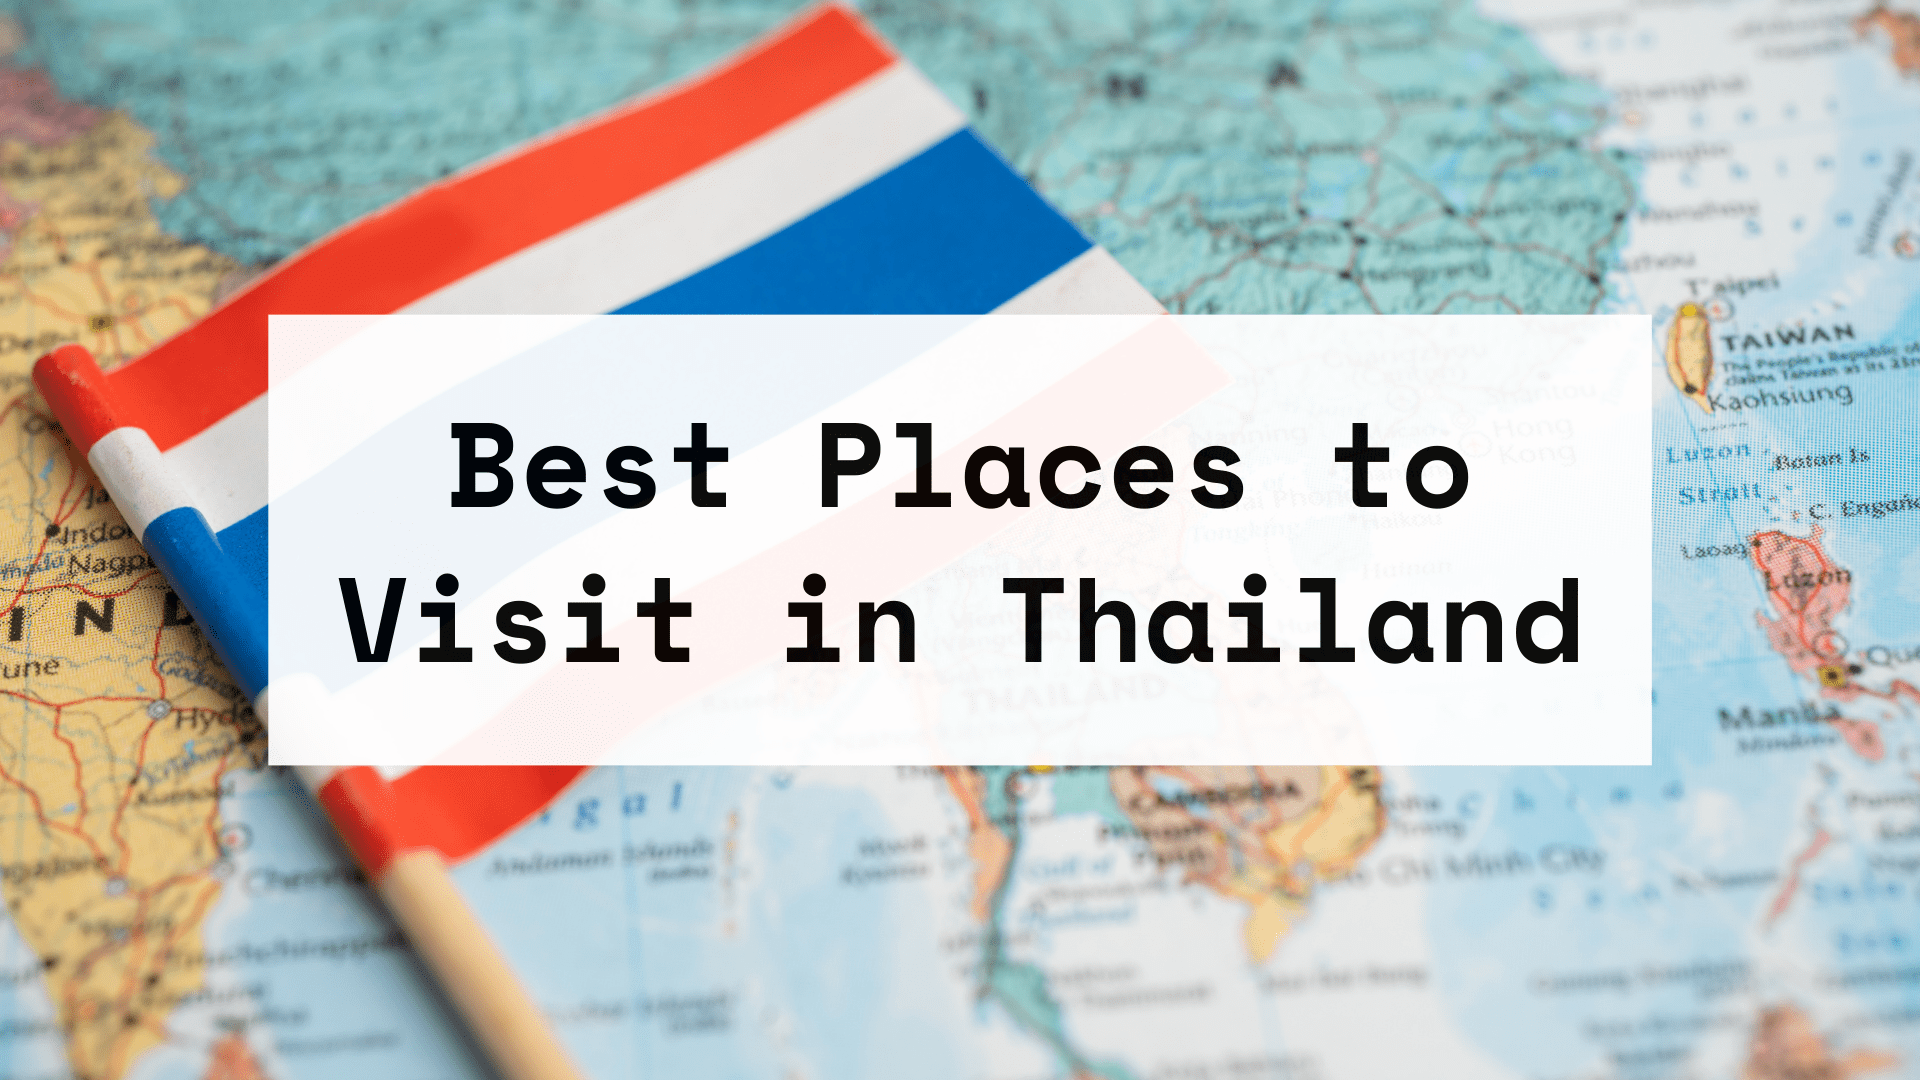 Best Places to visit in Thailand